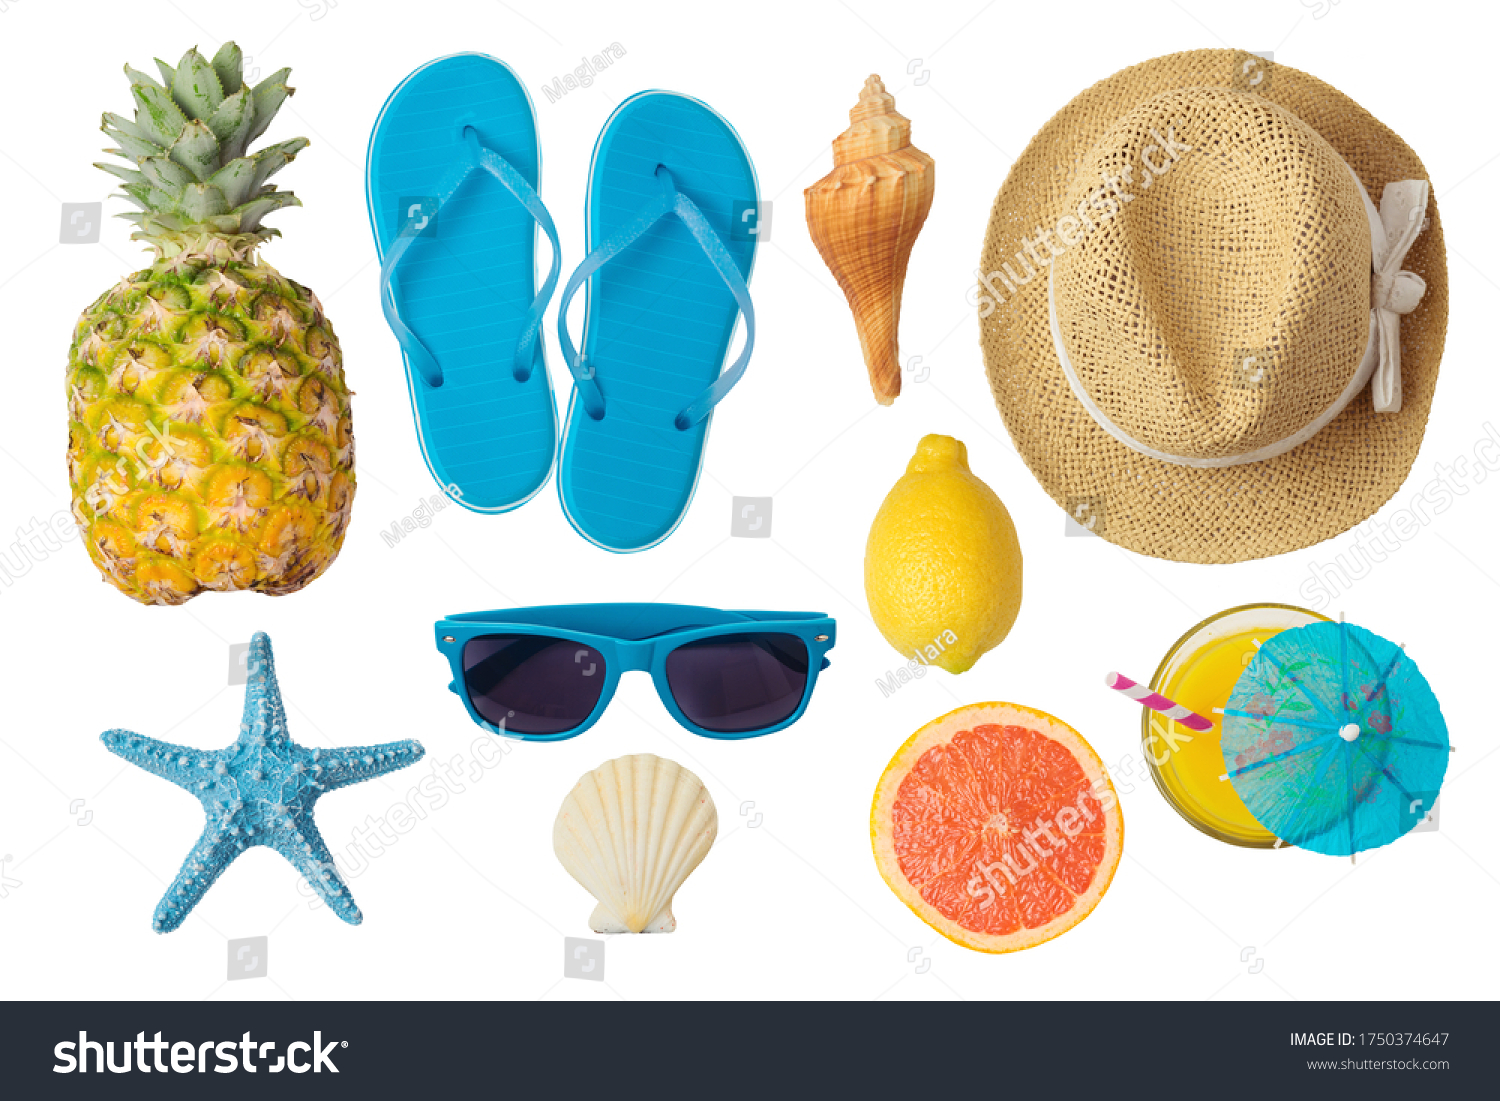 Summer objects isolated on white background. Top view from above #1750374647